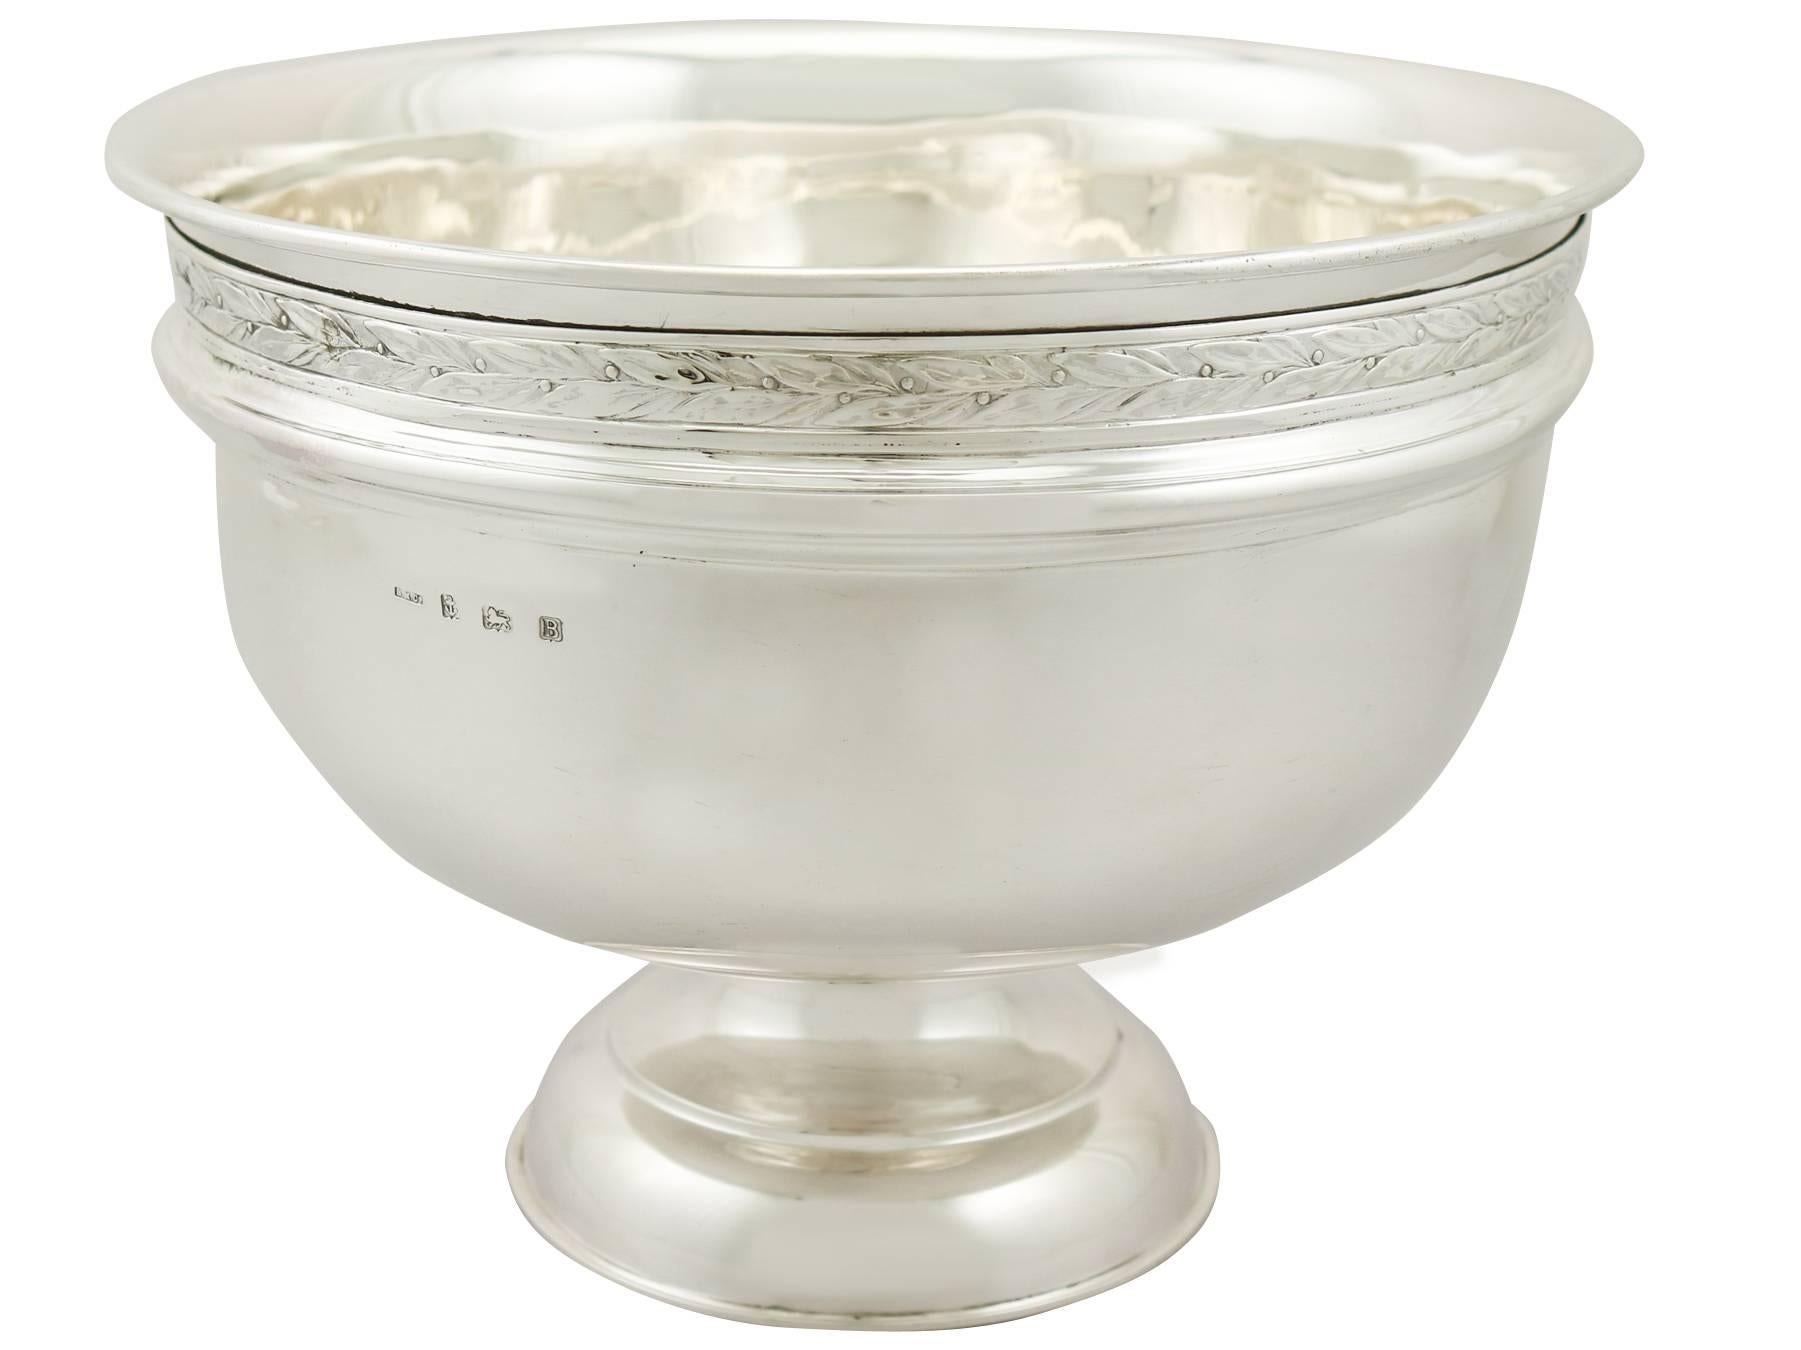 An exceptional, fine and impressive antique George V English sterling silver presentation bowl with golfing interest; an addition to our ornamental silverware collection.

This exceptional antique 1920s sterling silver bowl has a circular rounded